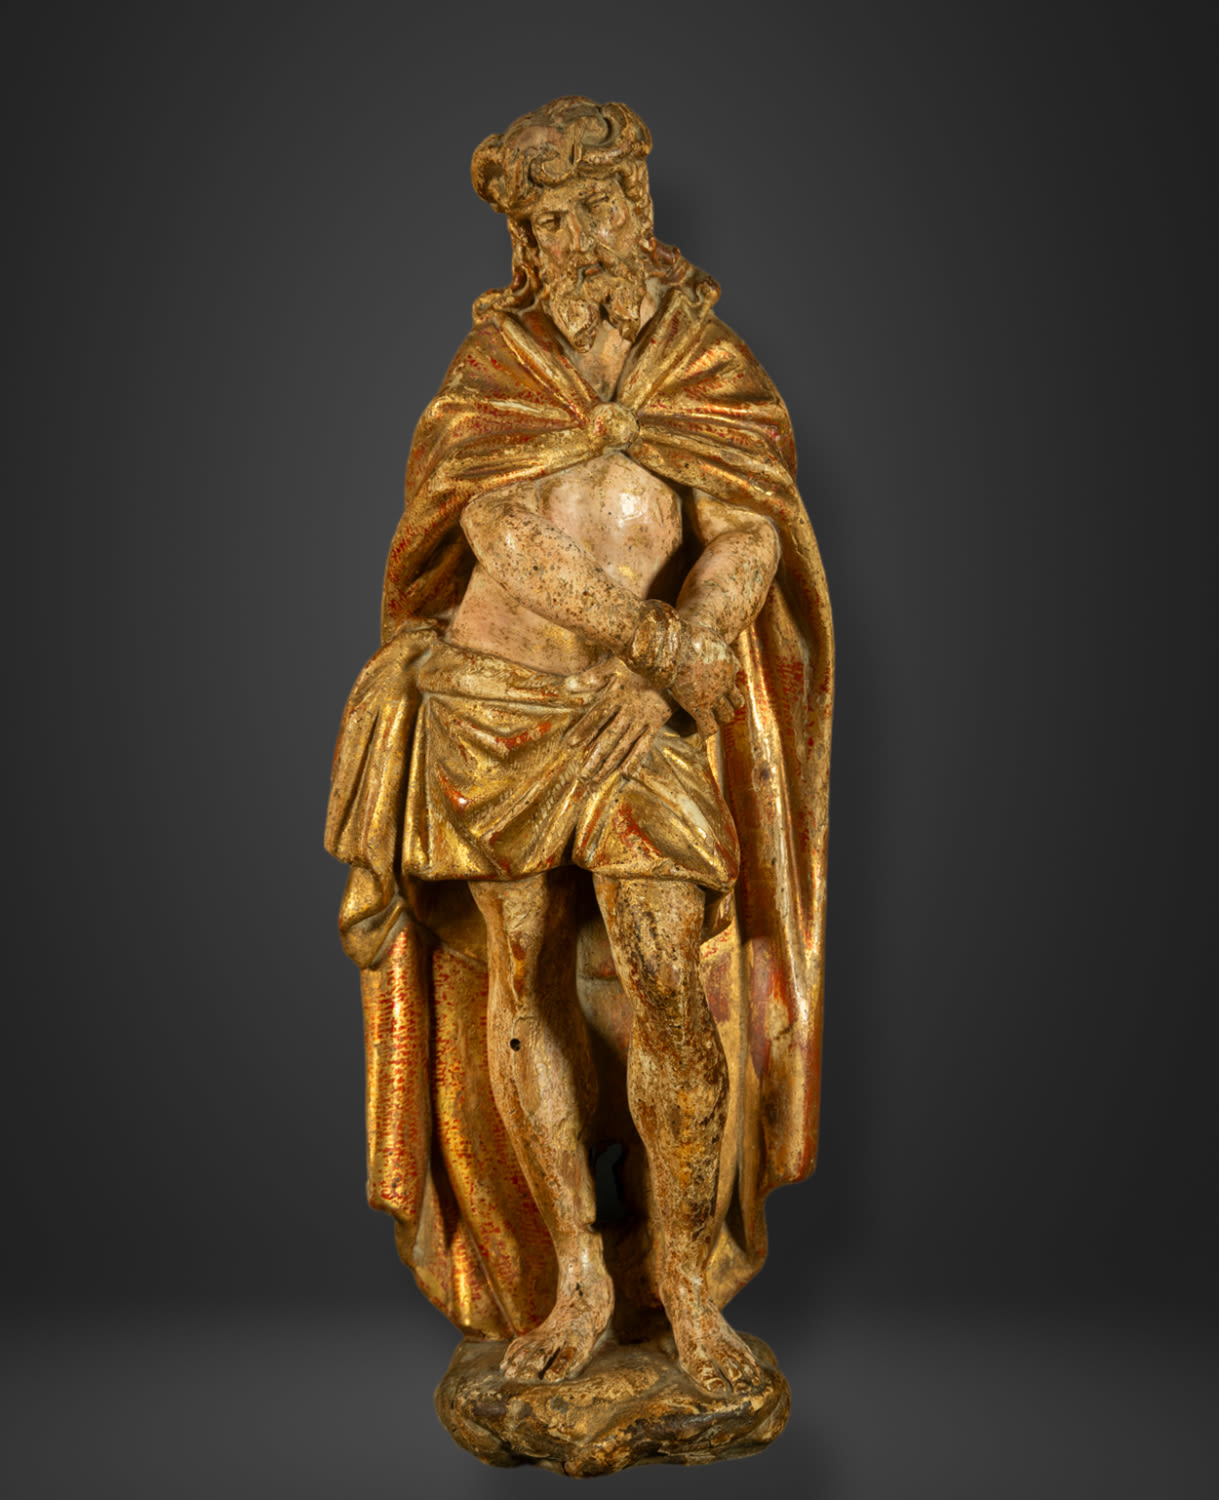 Exceptional 15th century Gothic Christ "Poupée" of Malines , Belgium, late 15th century work